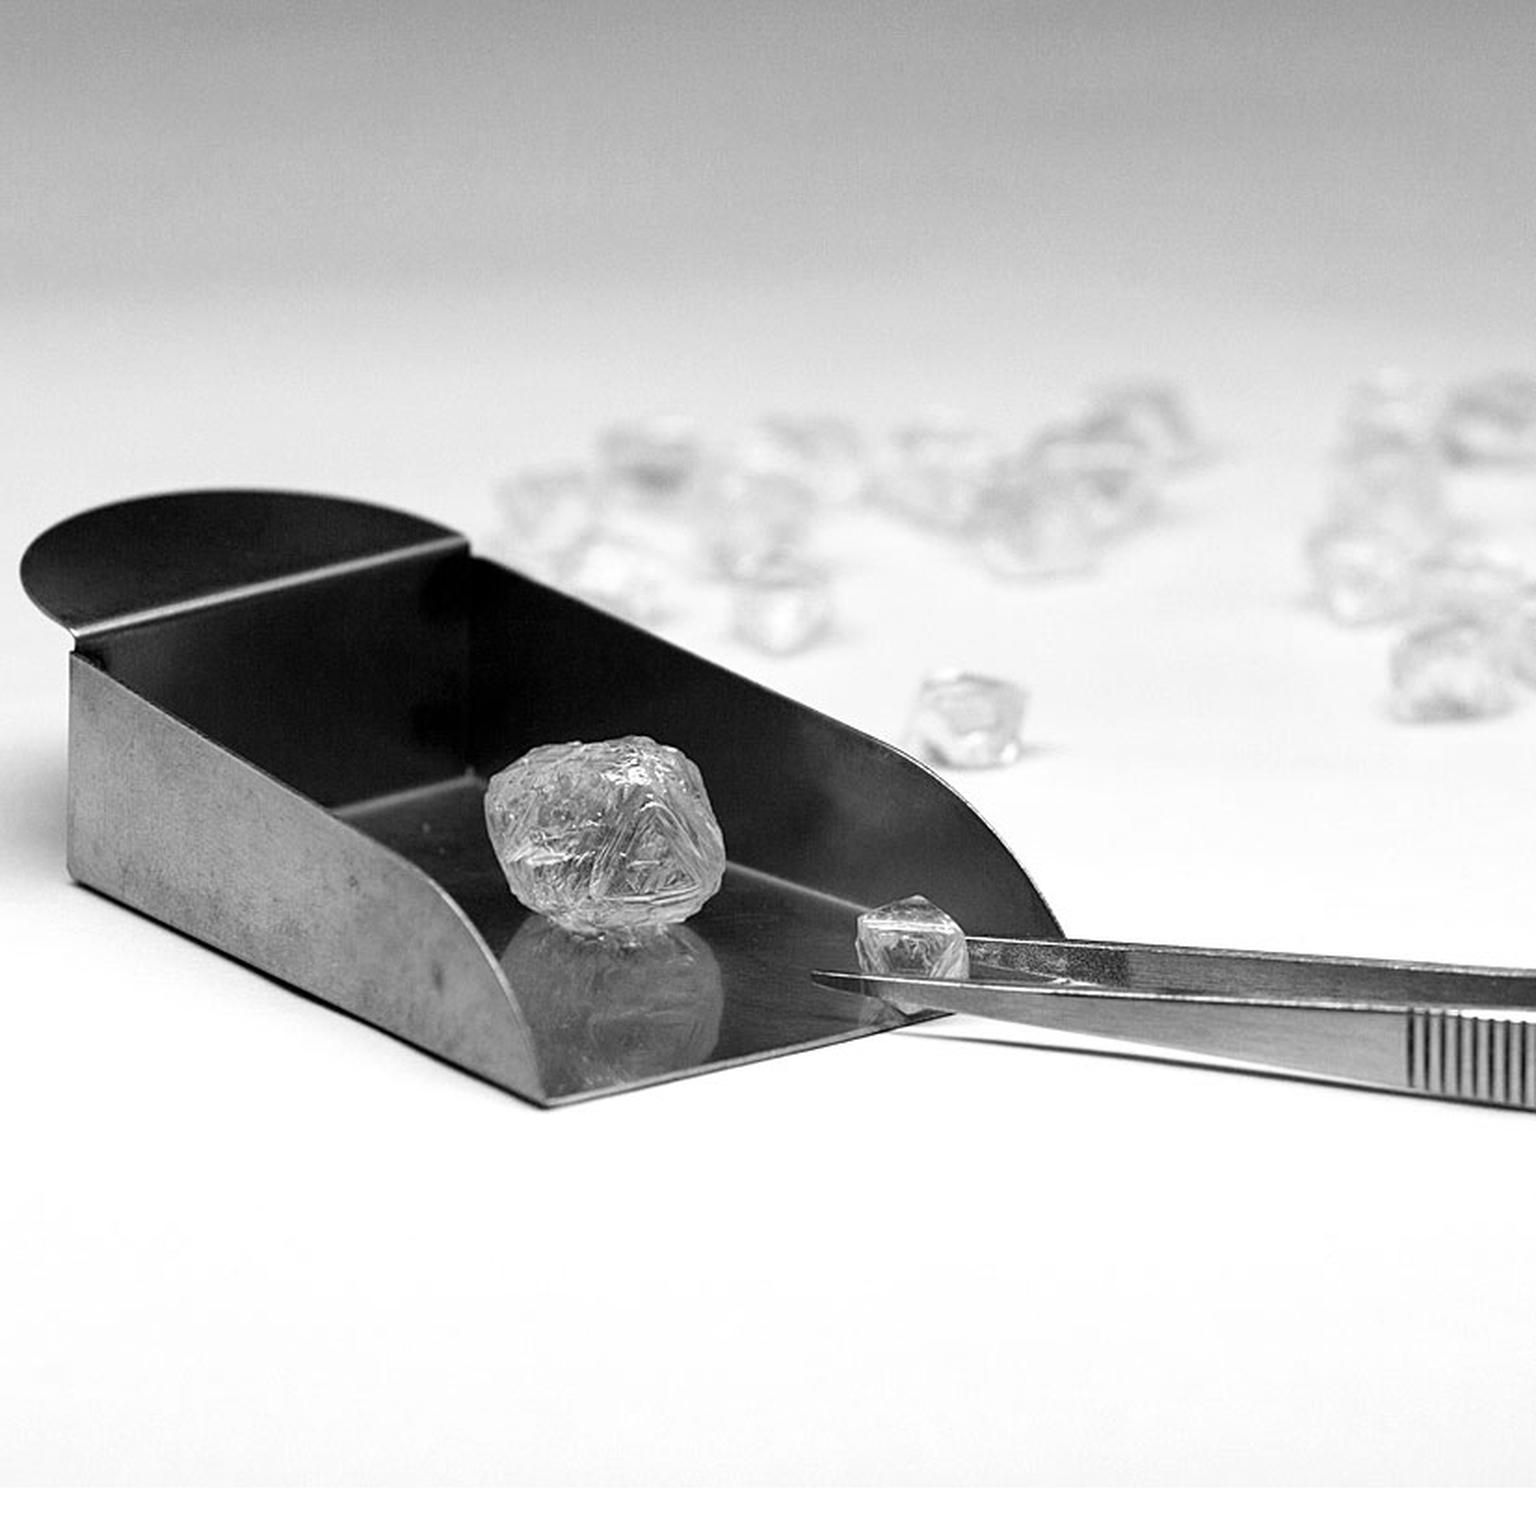 The largest Canadian diamond mined in Canada at 12.08 carat